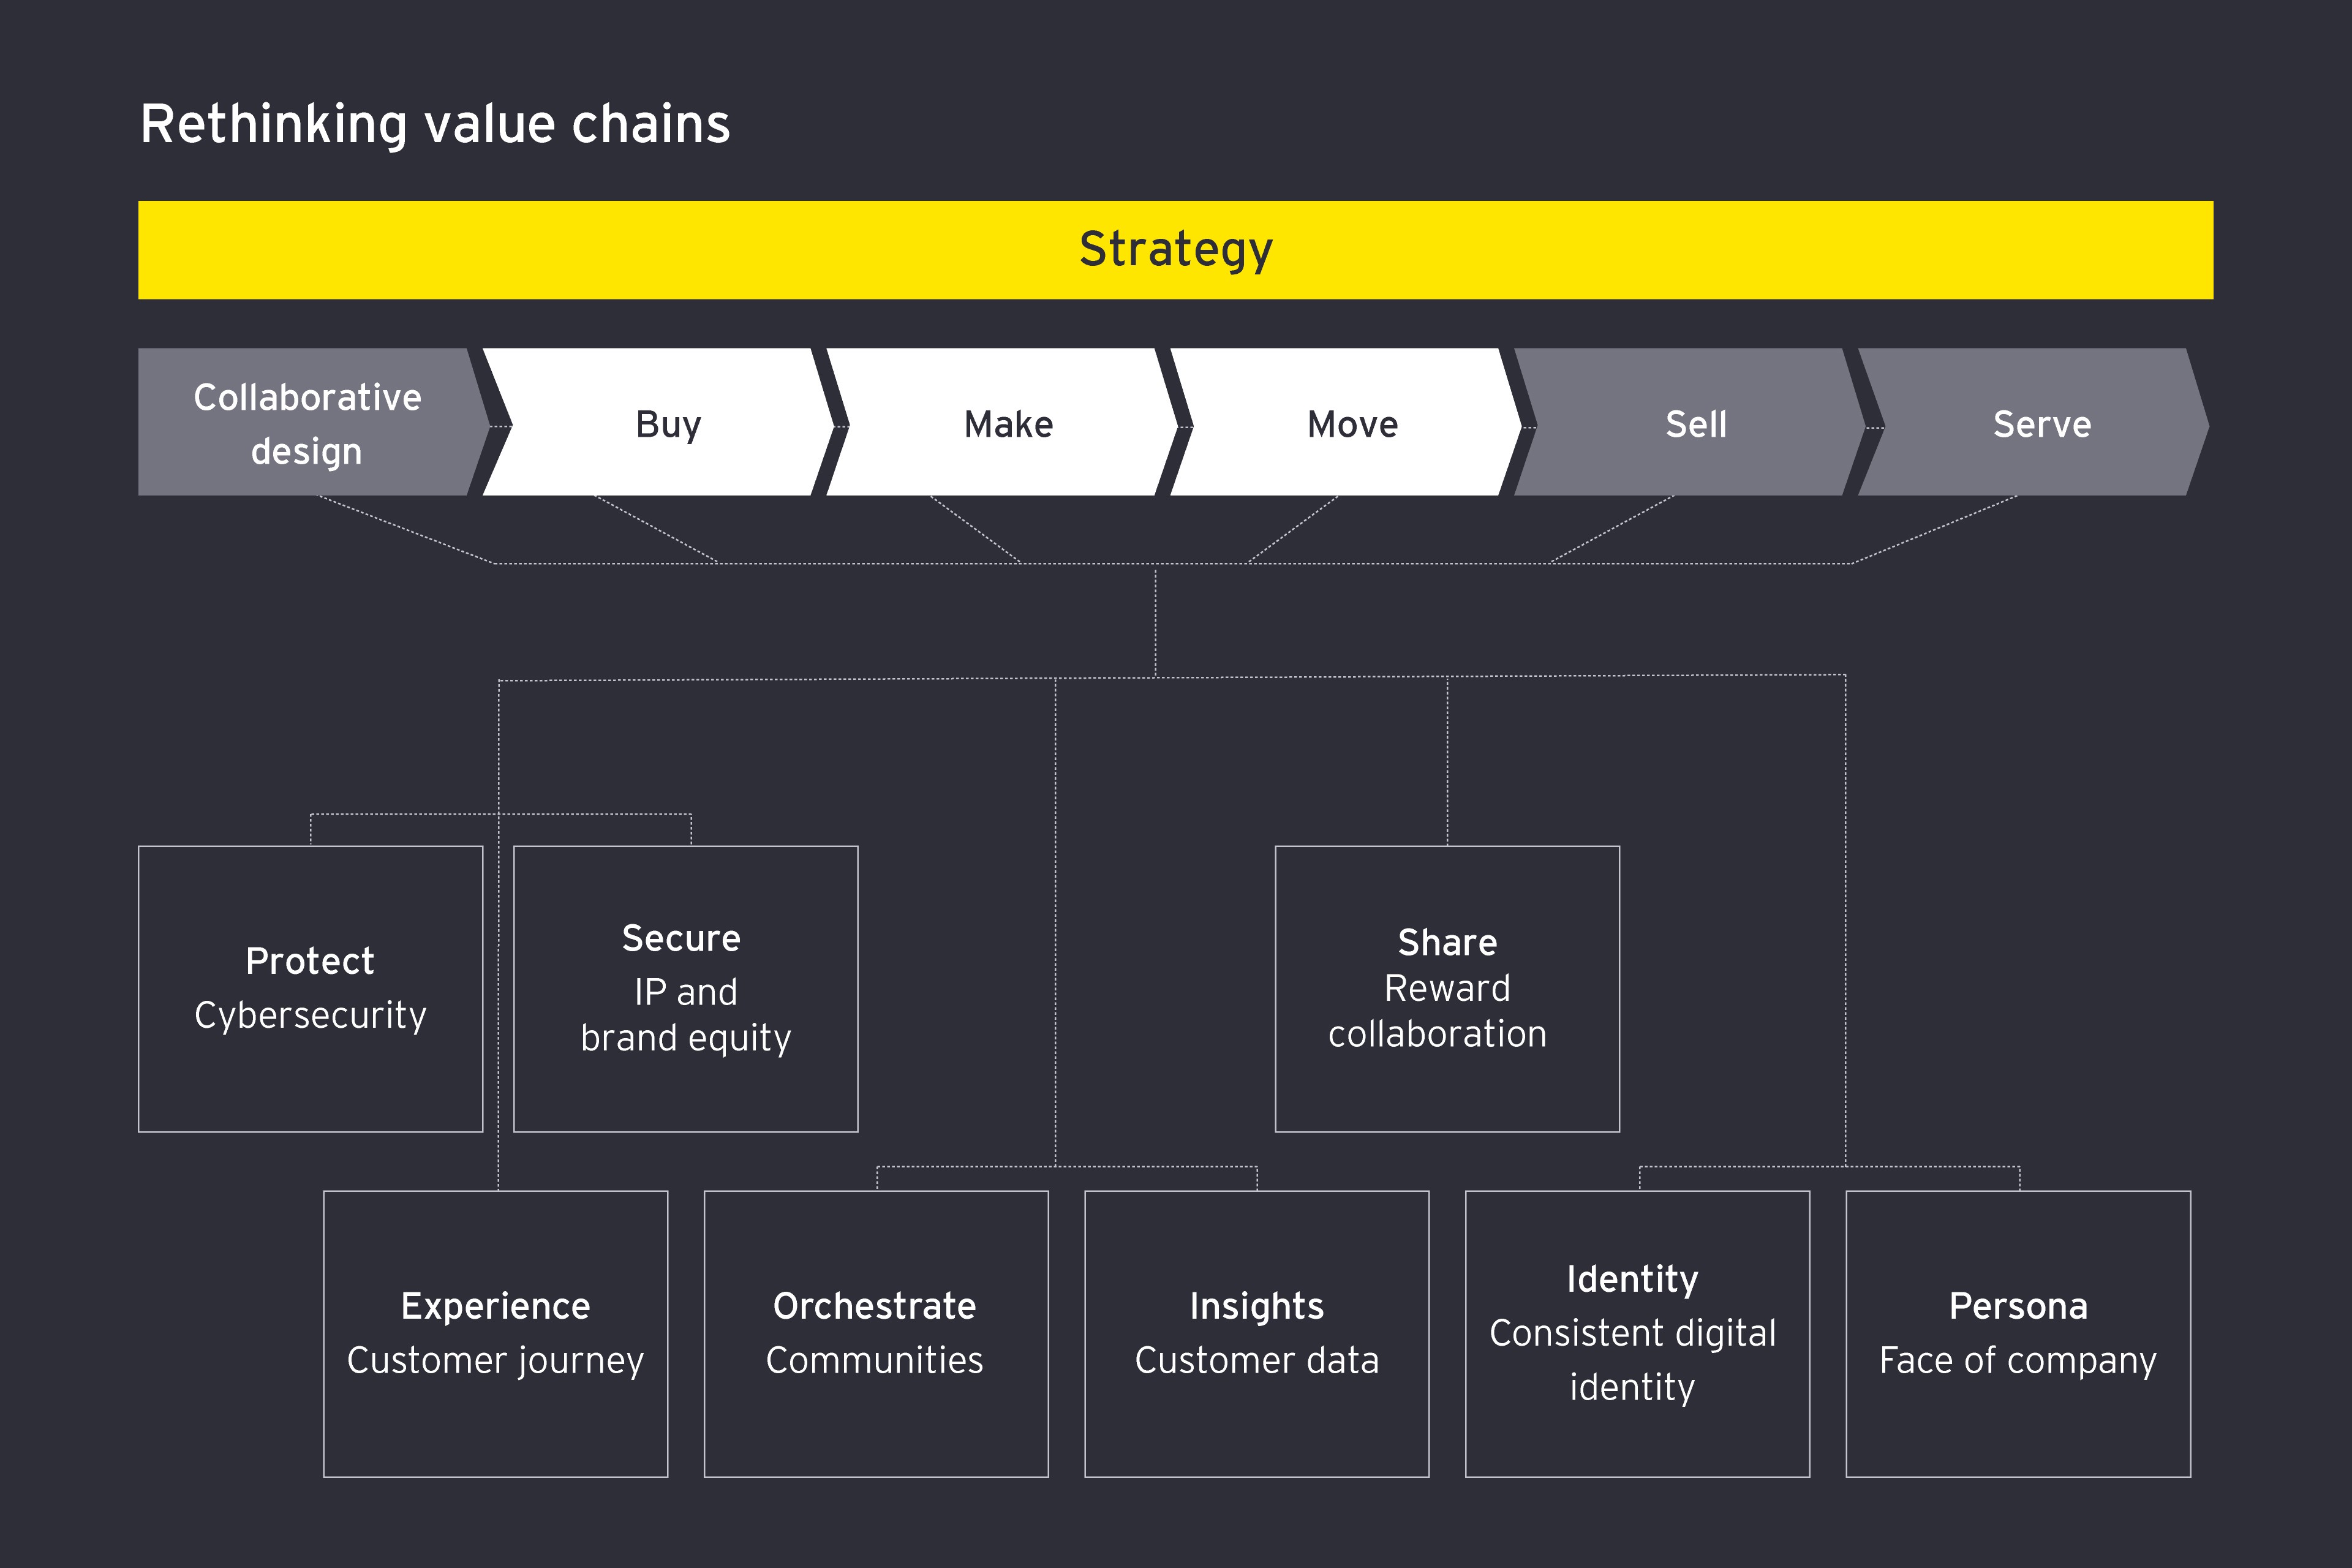 A visualization about how to rethink value chains by developing a strategy that harnesses the combined power of cybersecurity, IP and brand equity, customer journey, communities, customer data, reward collaboration, a consistent digital identity and the face of the company. 